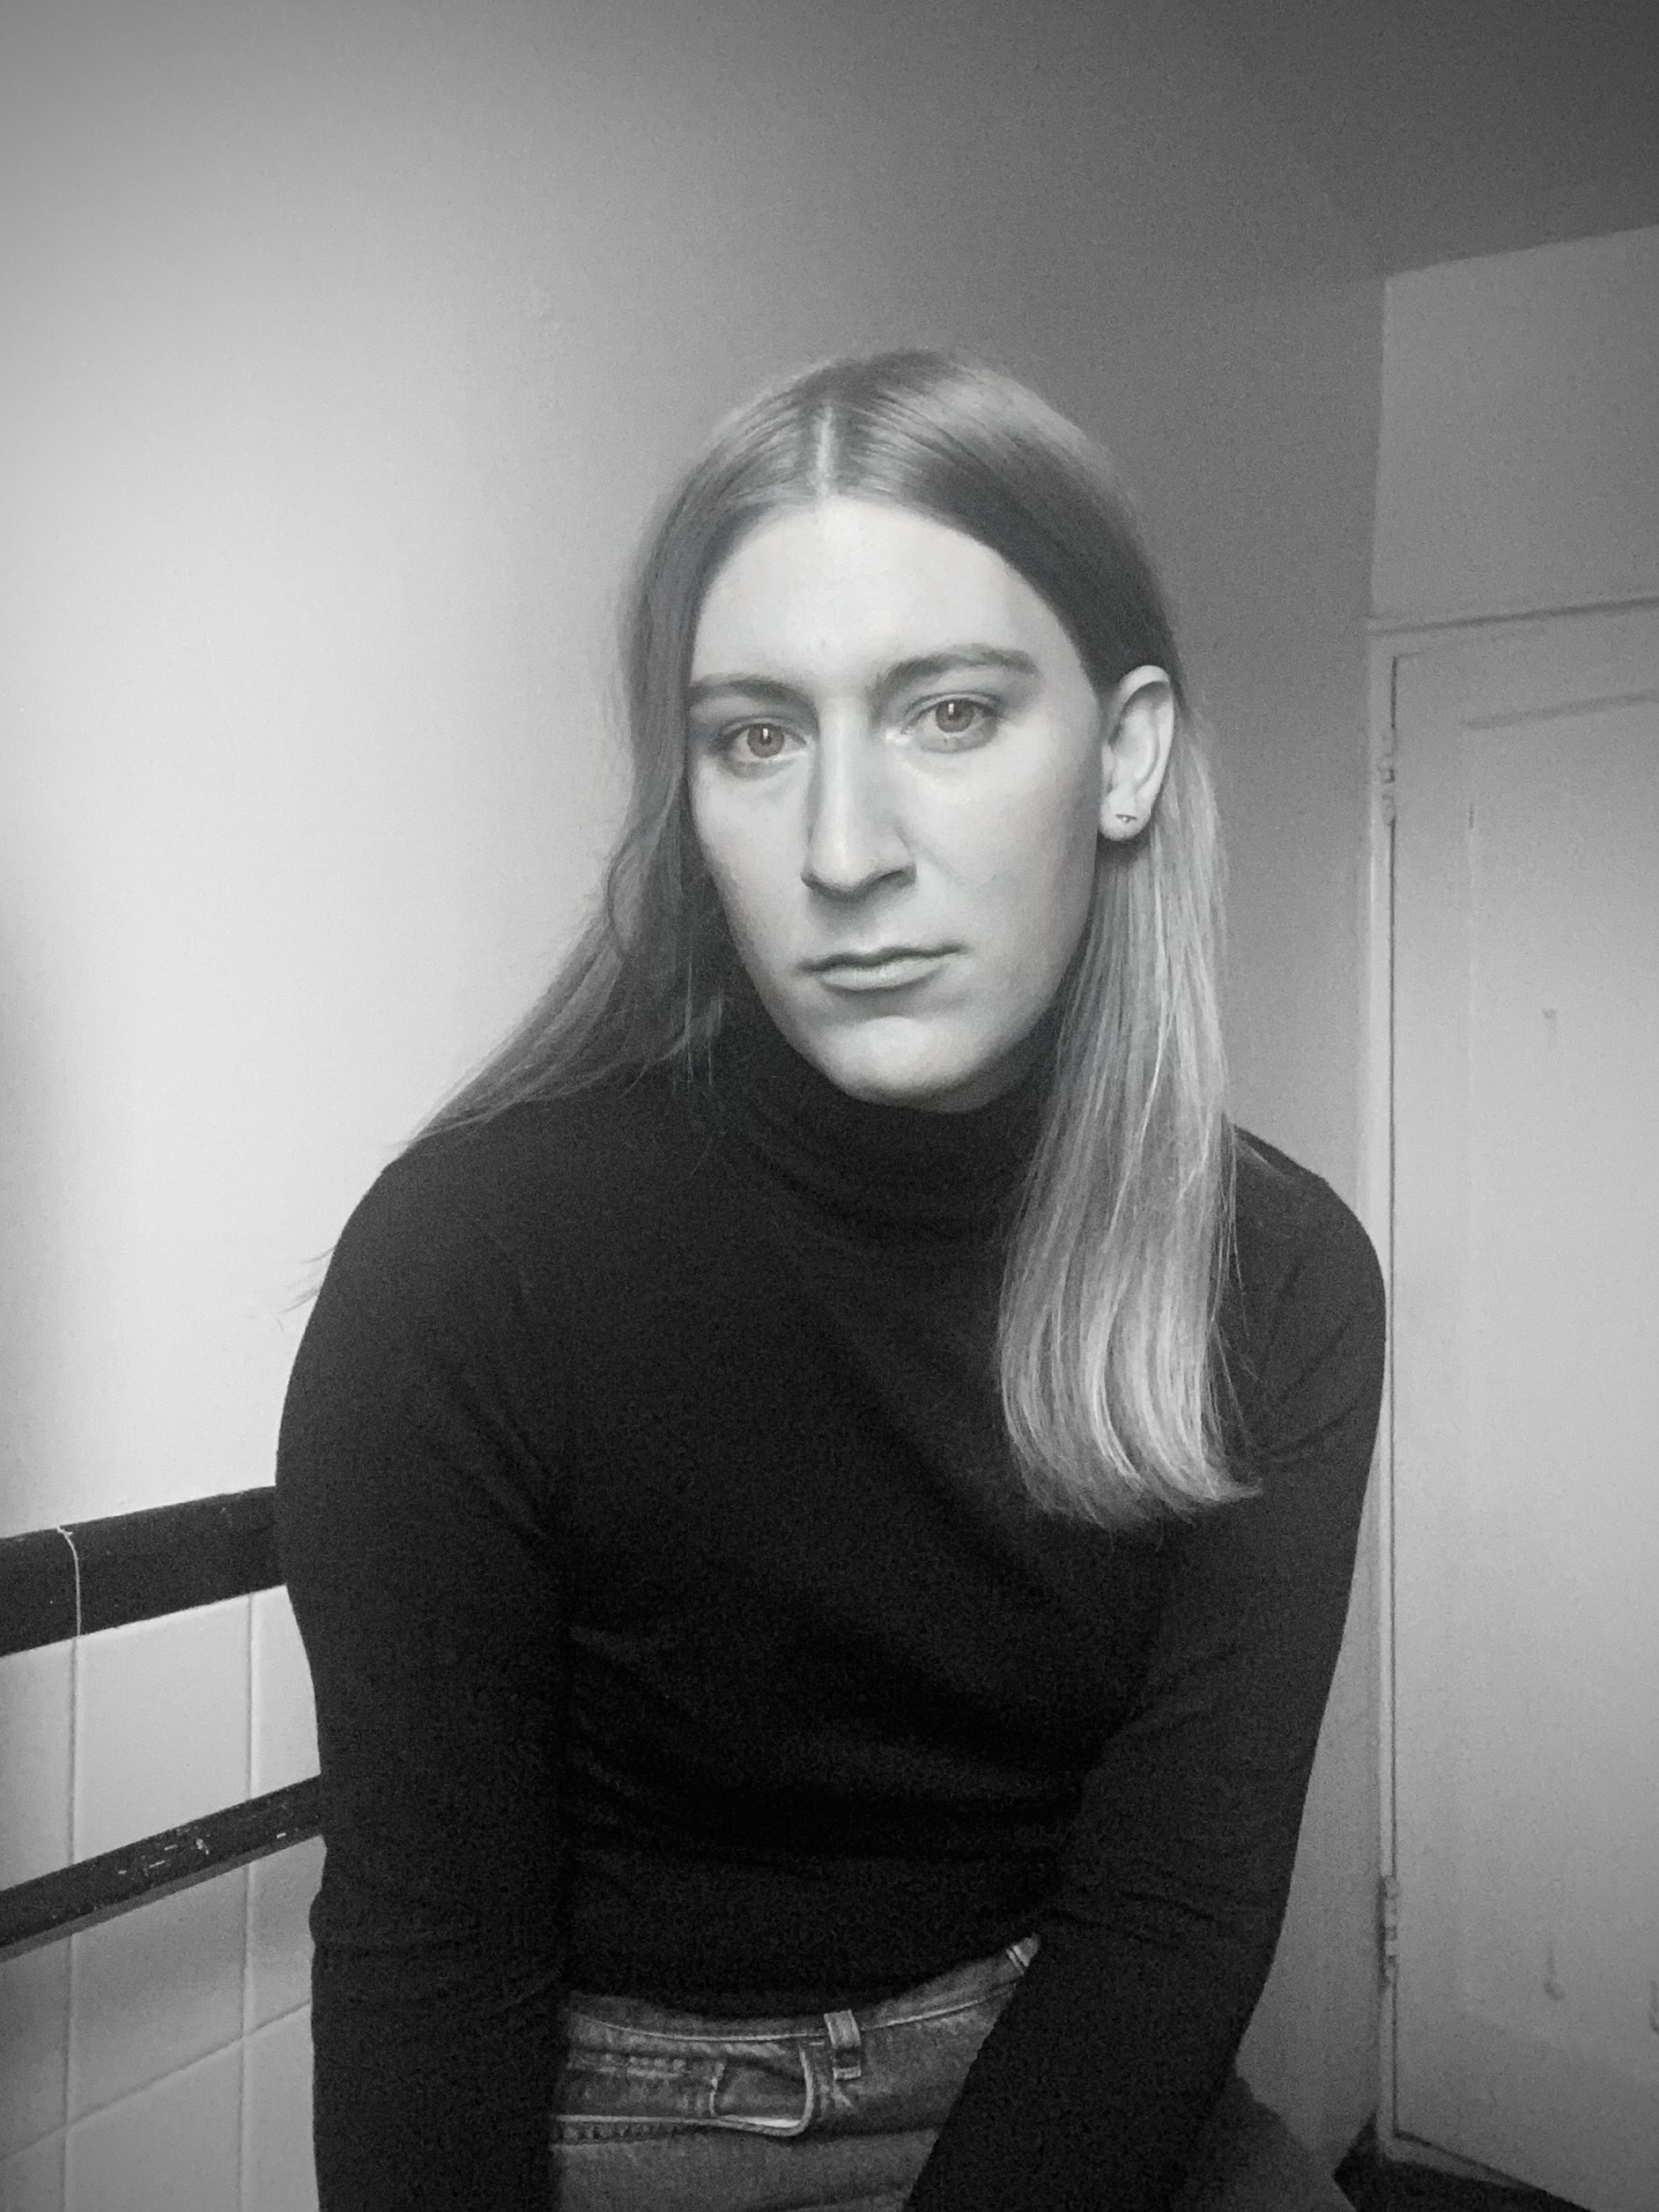 A black and white photo of Jameson Fitzpatrick looking at the camera. Jameson is wearing a black sweater and has long, blonde hair.